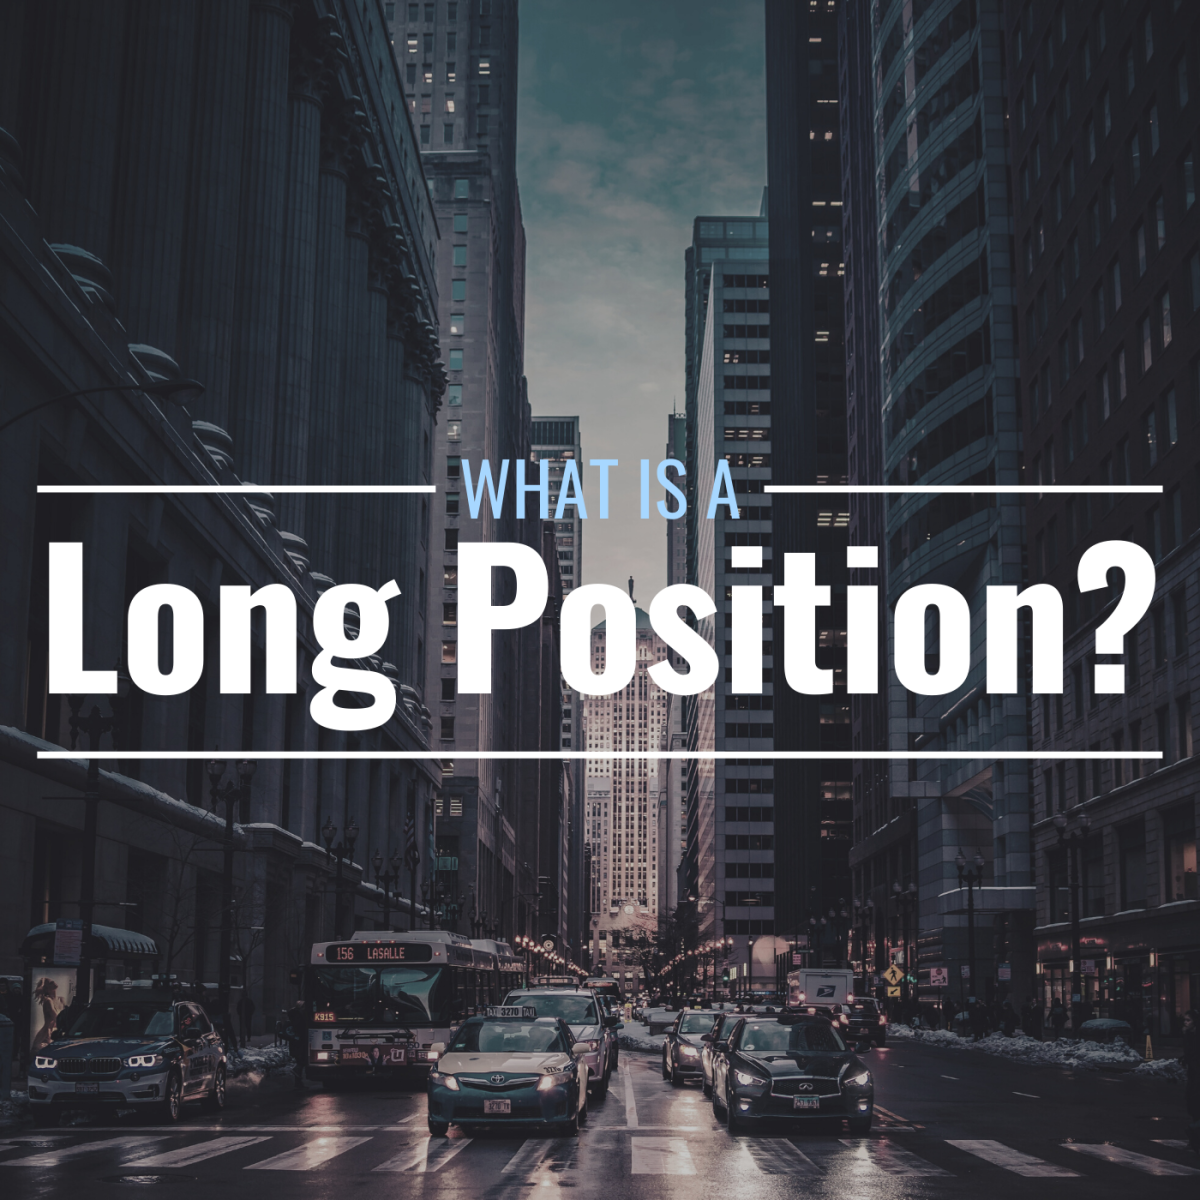 Darkened photo of oncoming cars and tall buildings on a crowded city street with text overlay that reads "What Is a Long Position?"